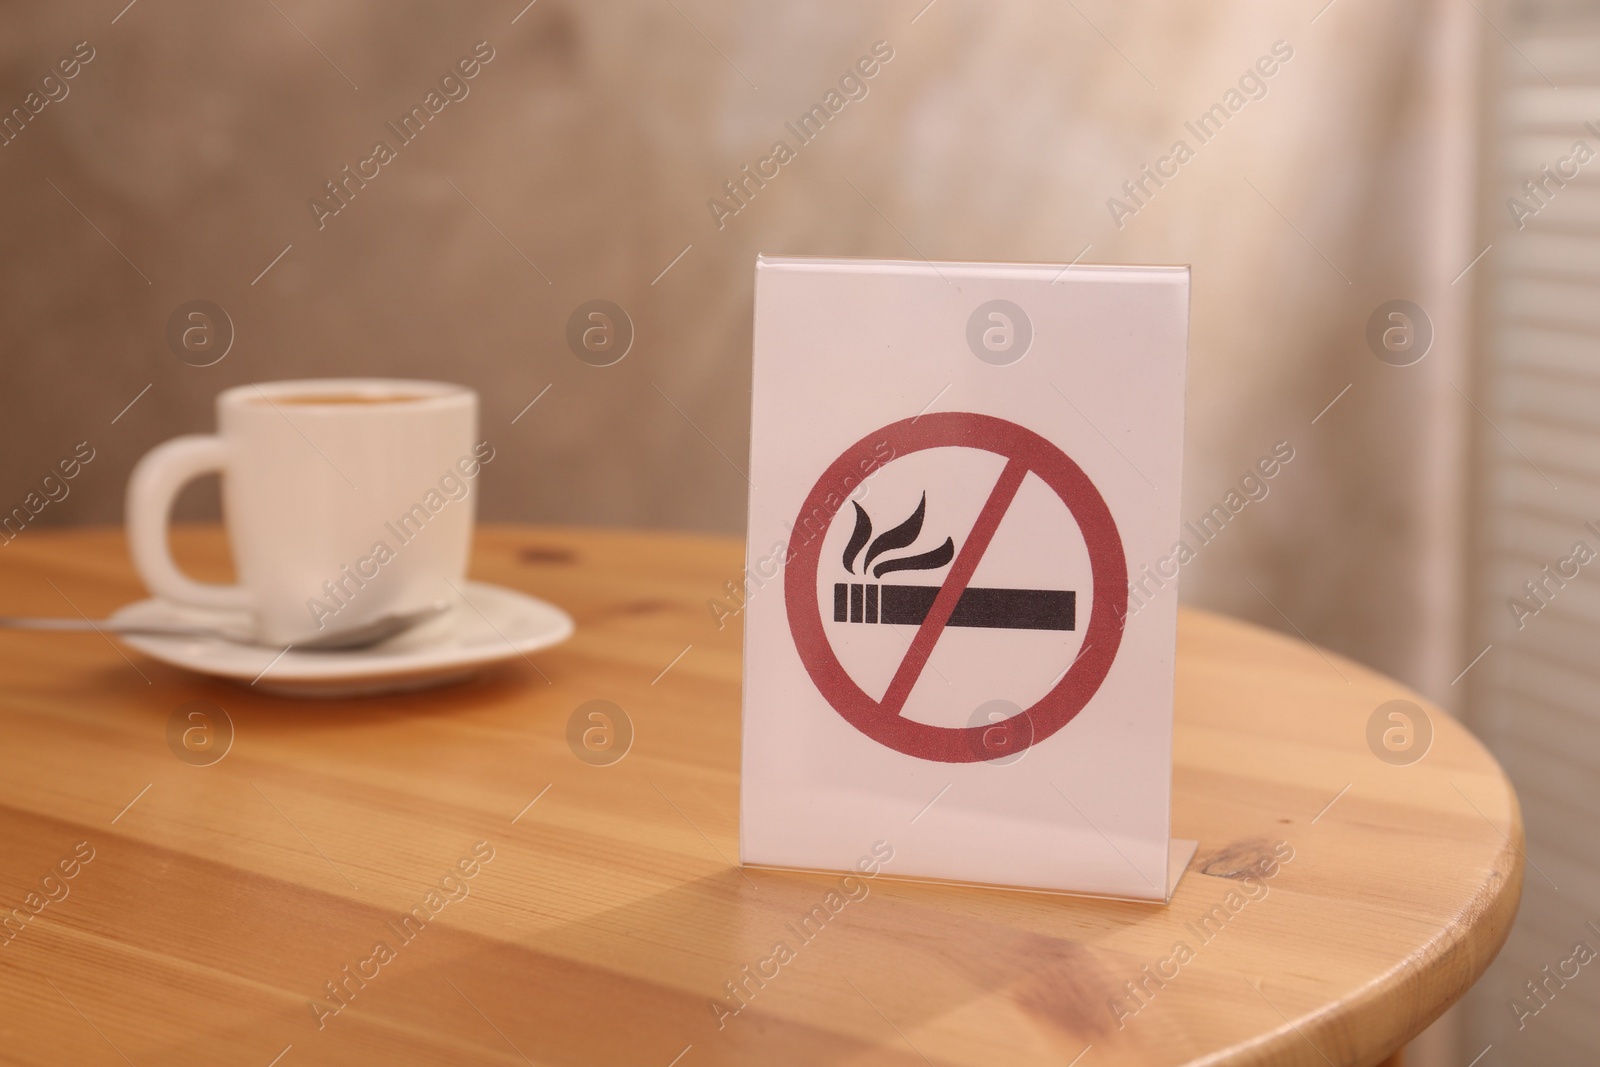 Photo of No Smoking sign and cup of drink on wooden table indoors, selective focus